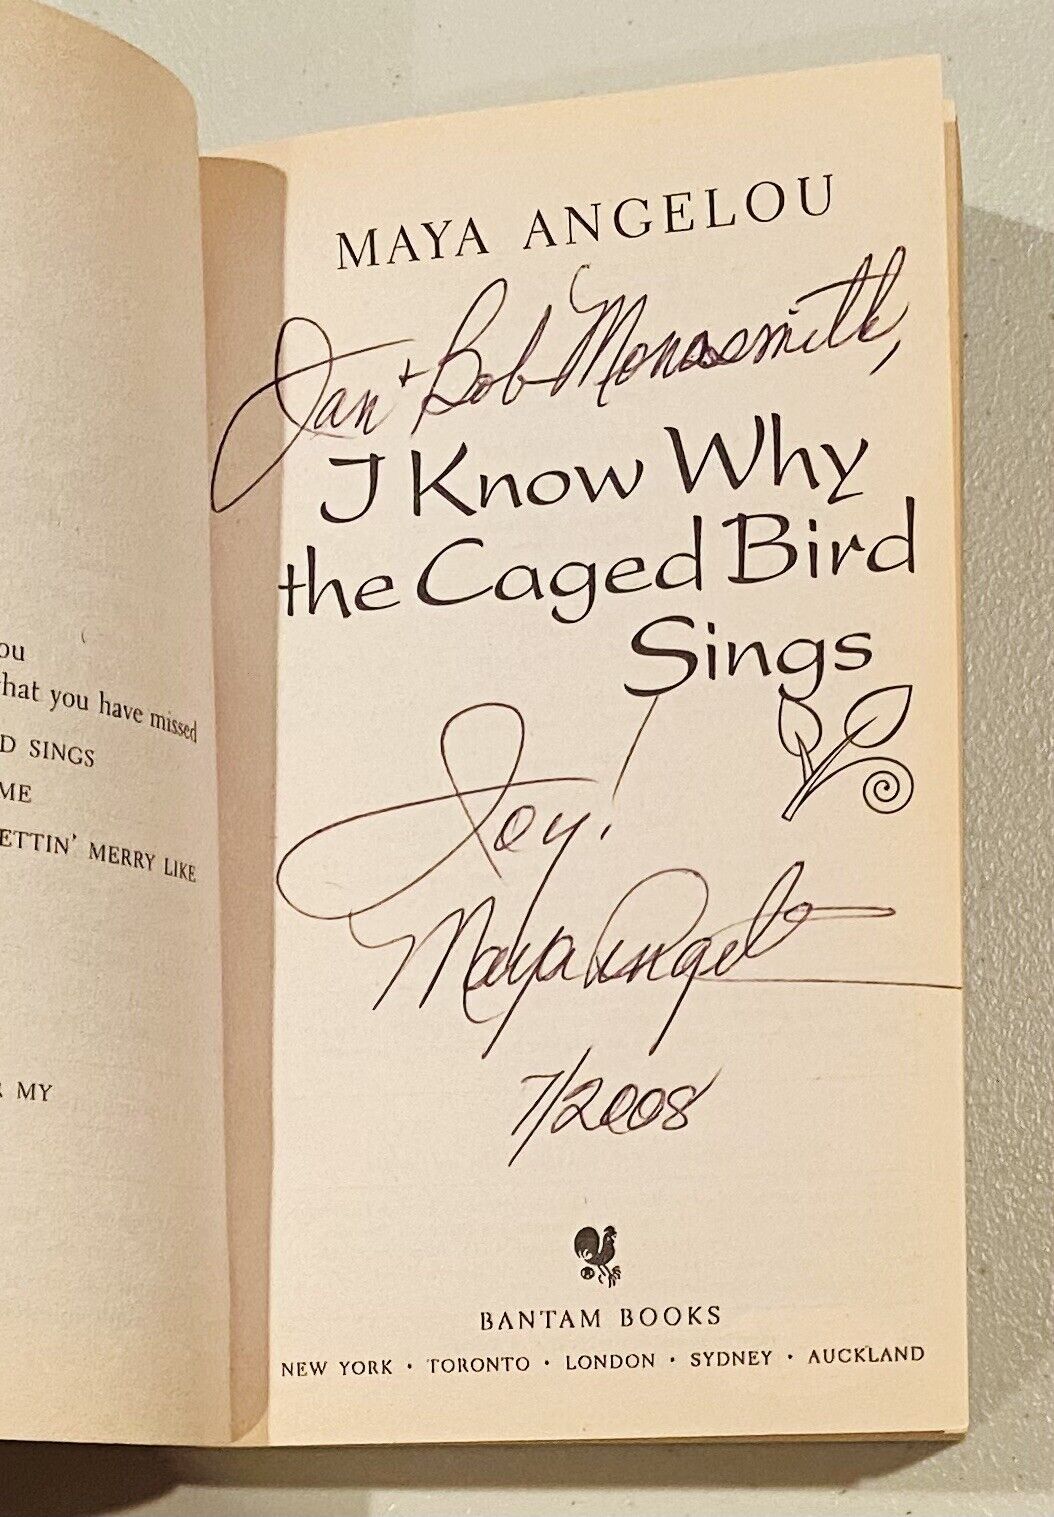 Maya Angelou Signed Autographed SC Book JSA “I Know Why The Caged Bird Sings”